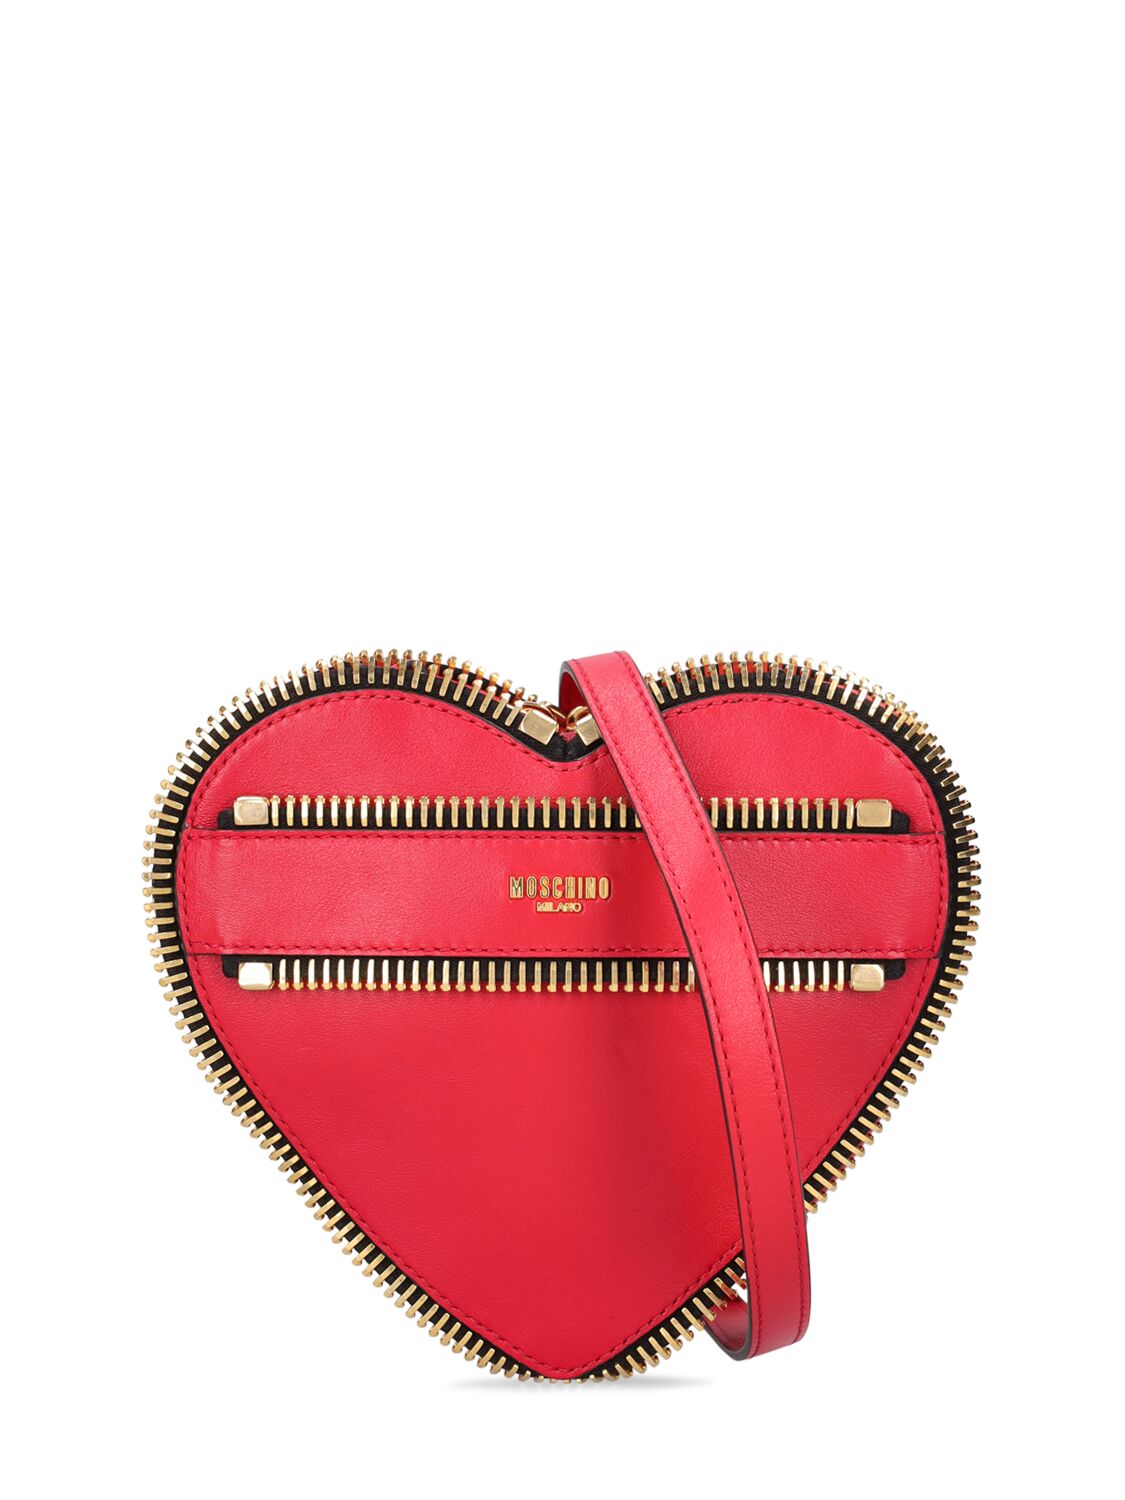 Moschino Rider Leather Heart Bag In Black